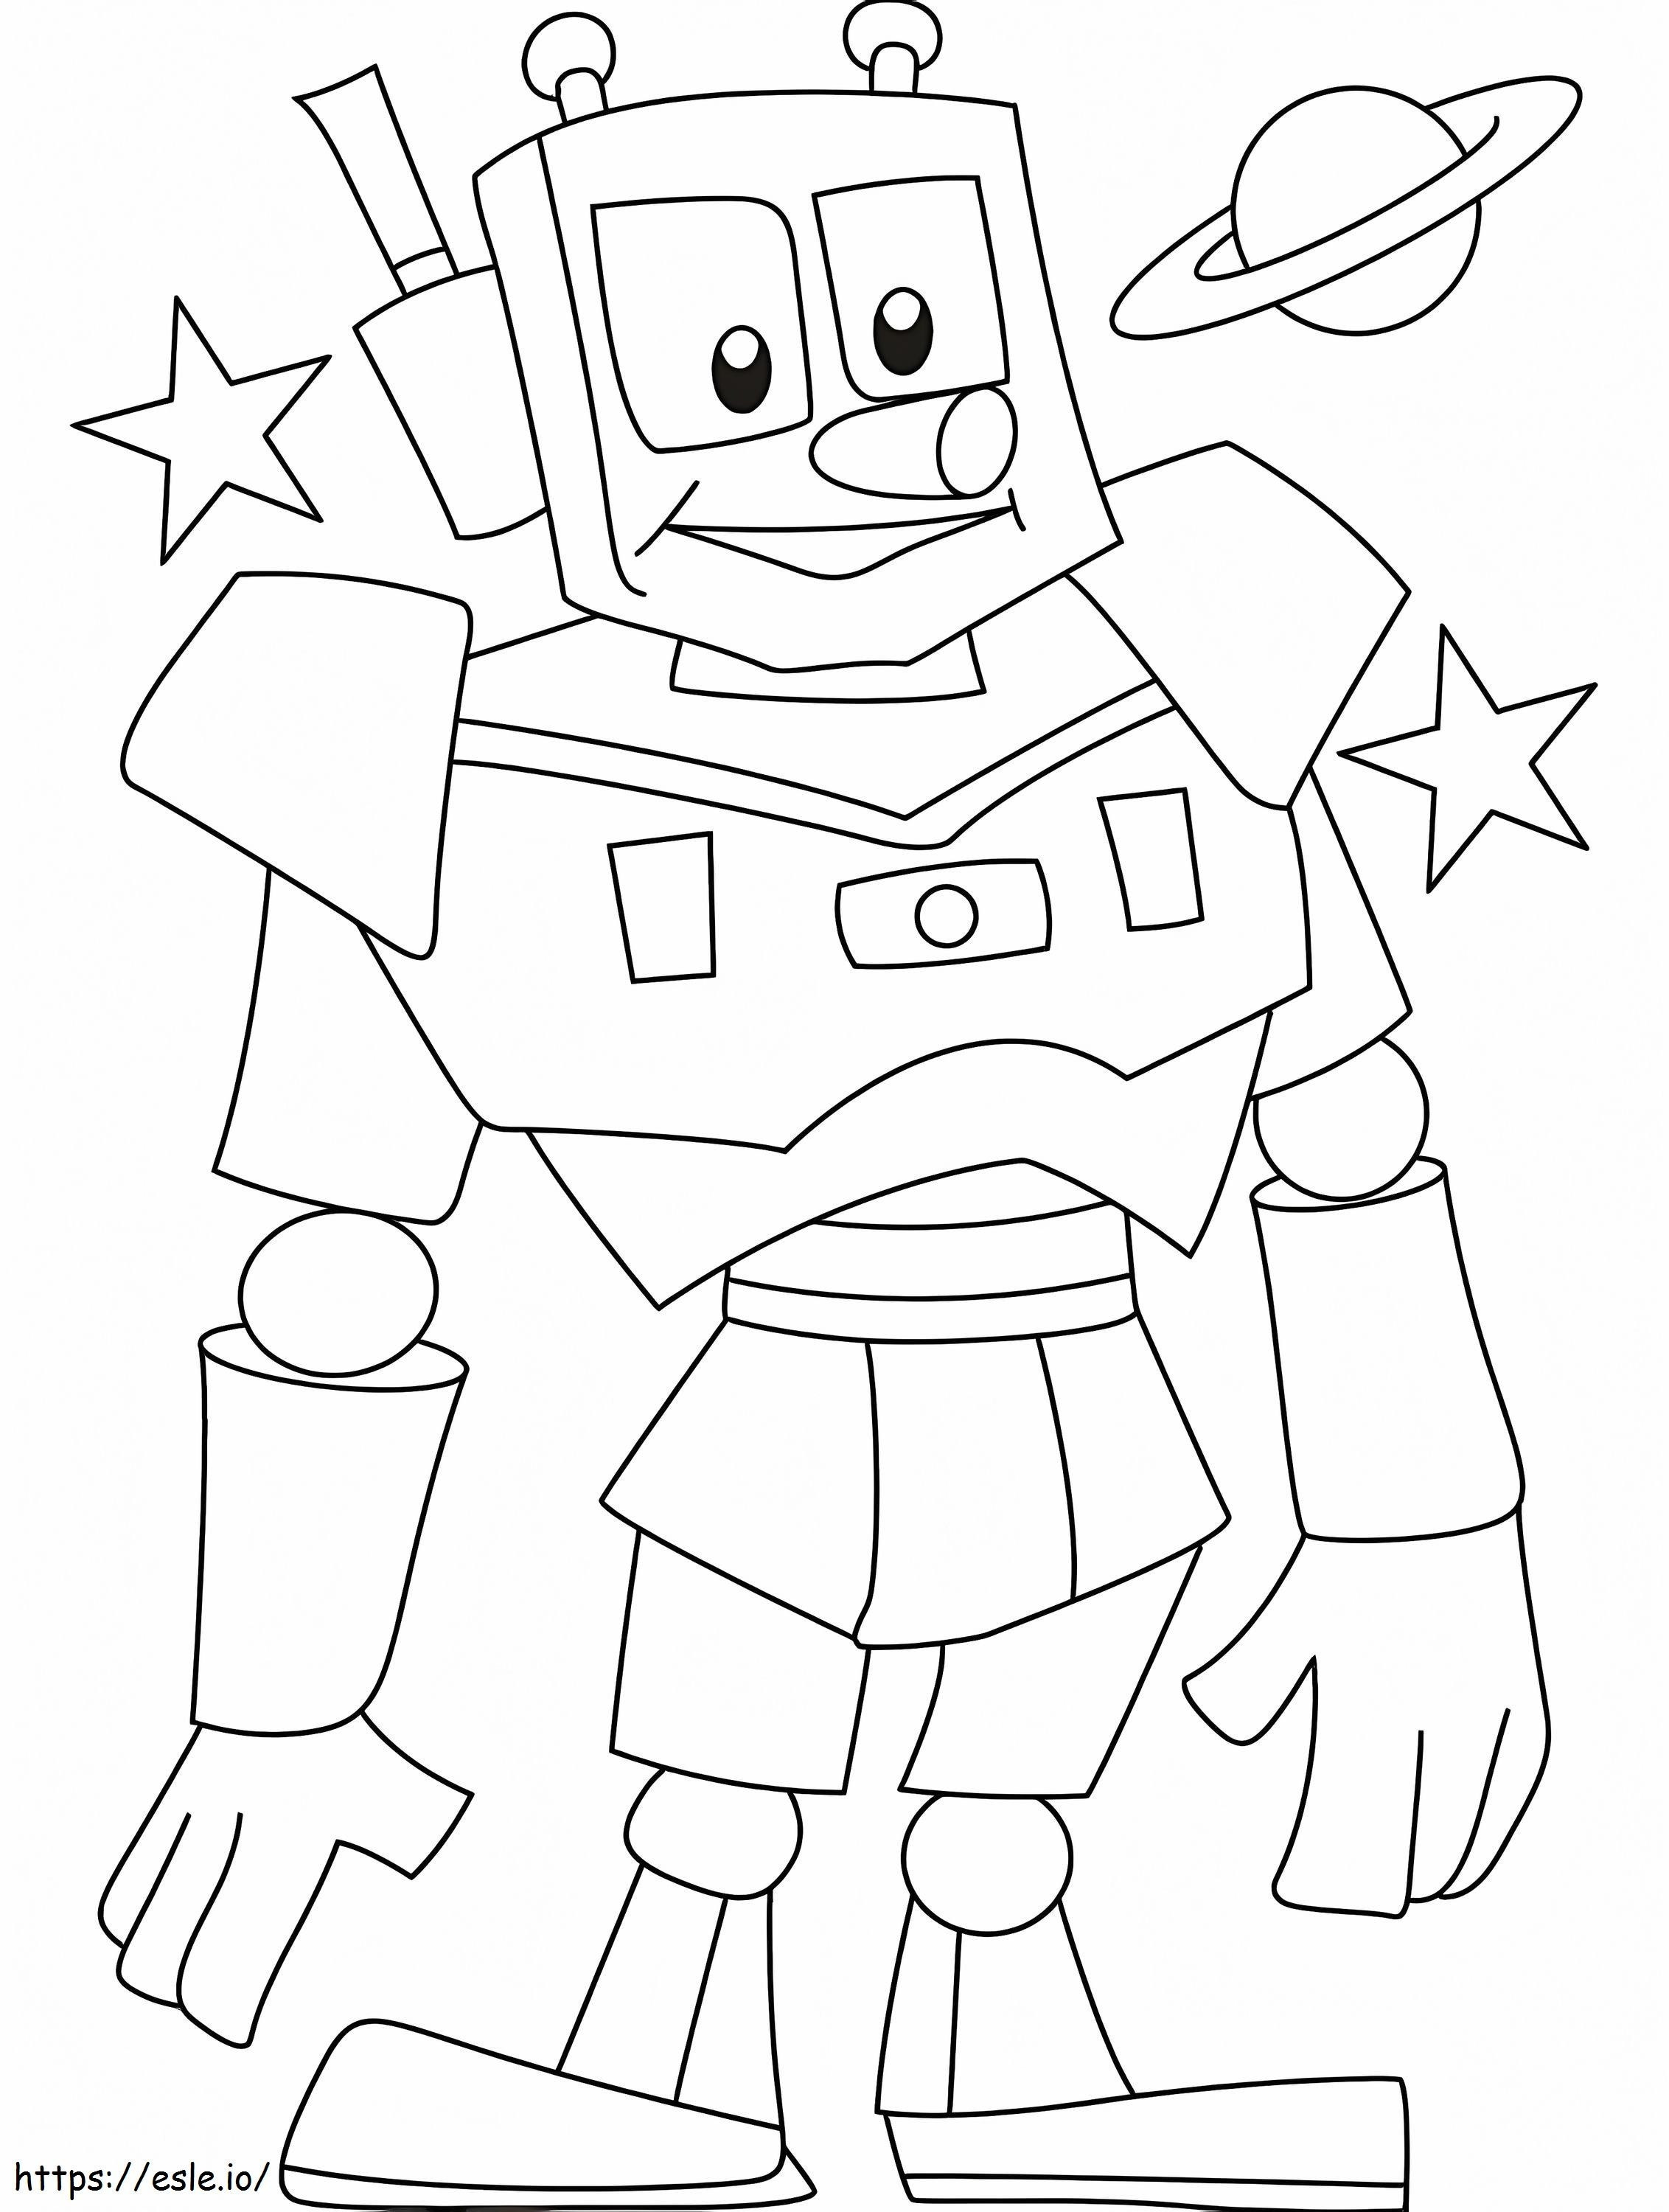 Awesome Robot coloring page